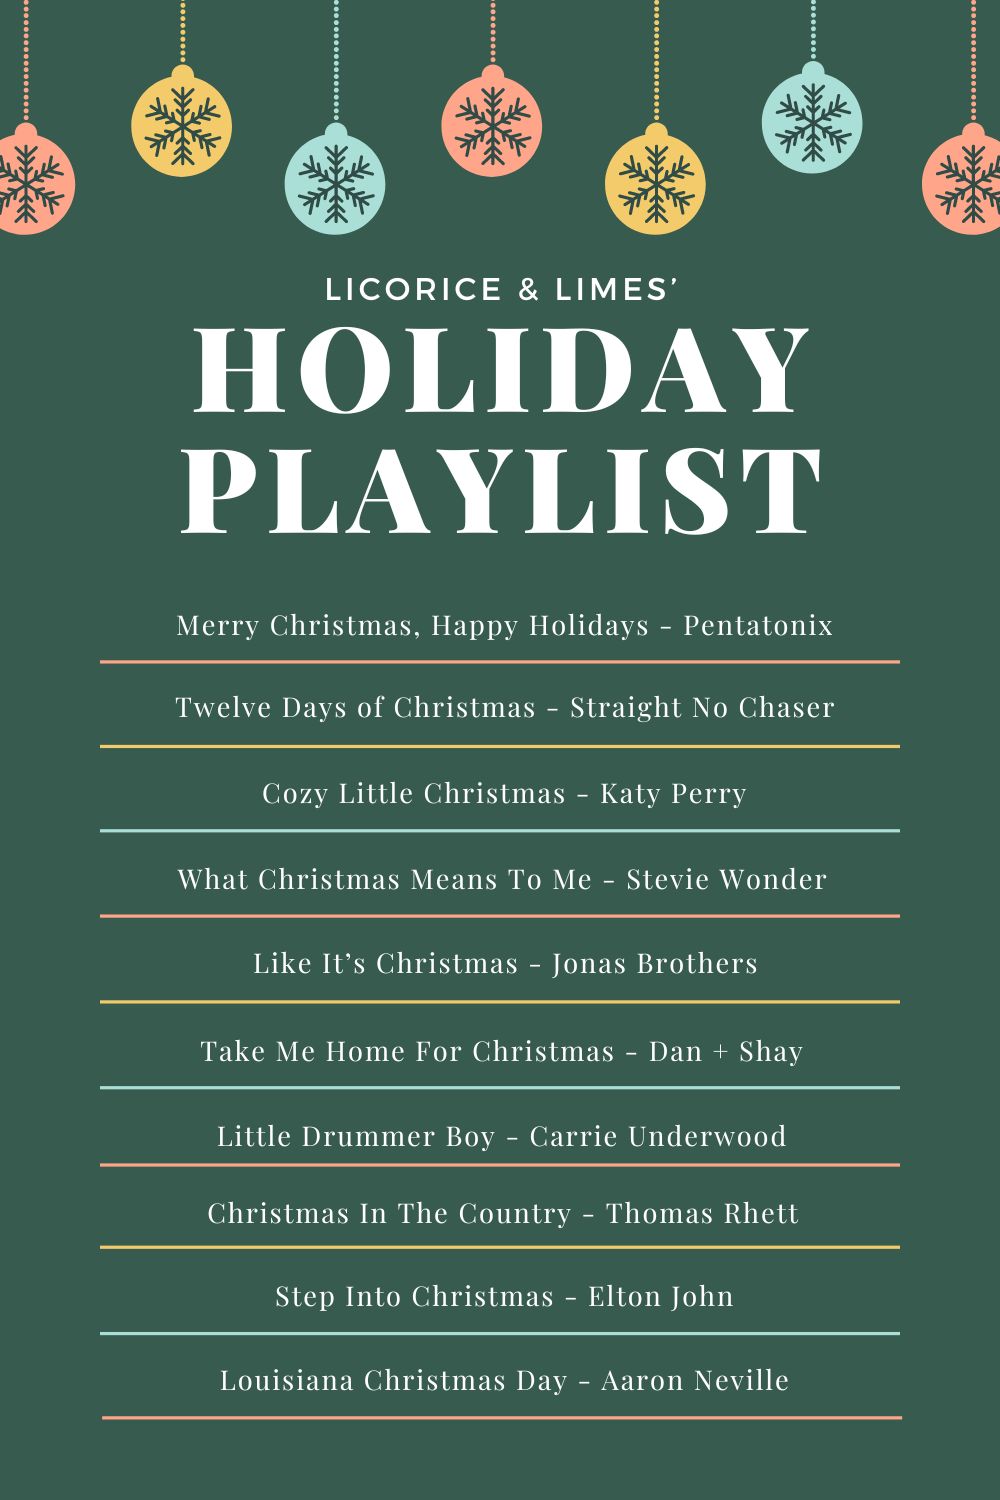 A holiday playlist that will put you in the Christmas spirit.